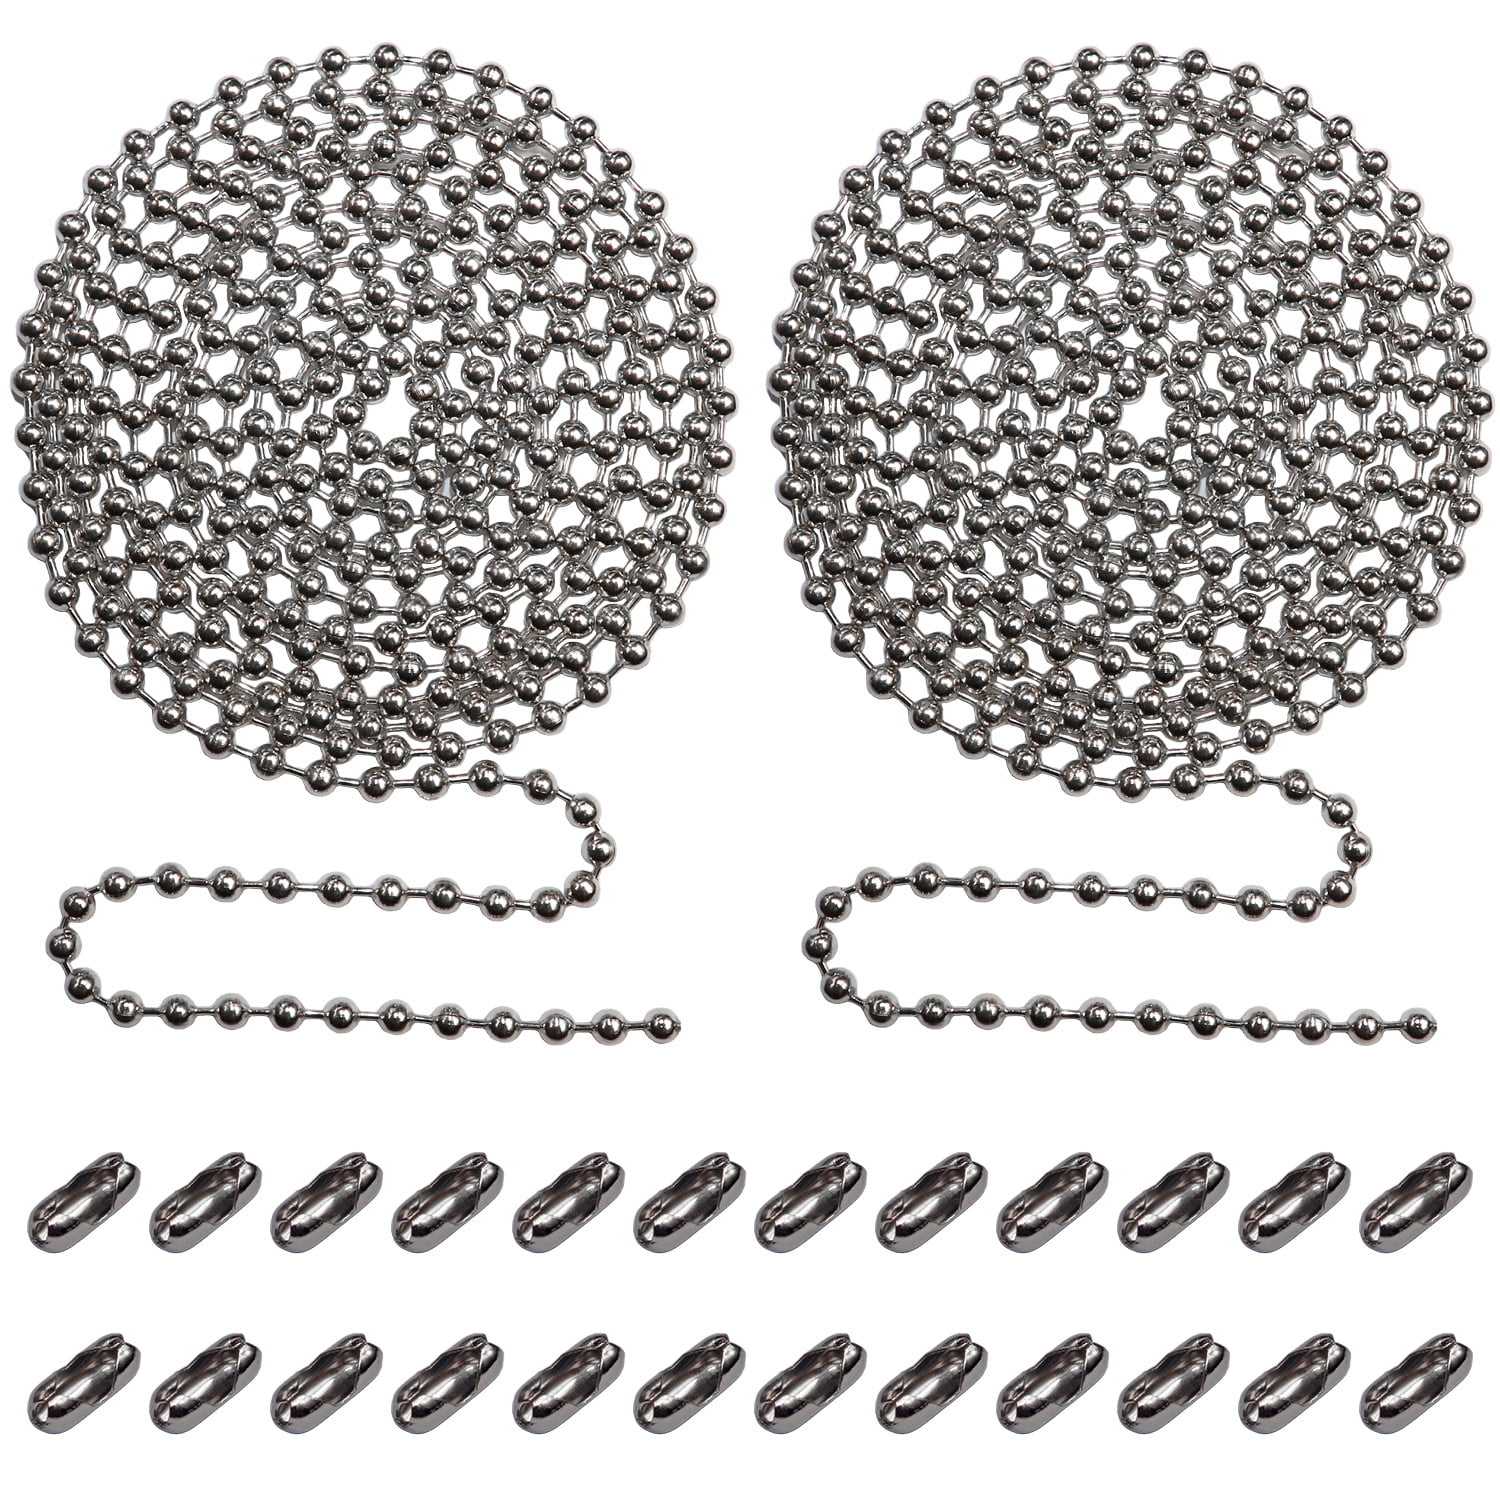 Beaded Pull Chain Extension with Connector for Ceiling Fan or Light (2pc in  One Package) 10 Feet Beaded Roller Chain with 12 Matching Connectors Each  (3.2mm Diameter, Silver) 